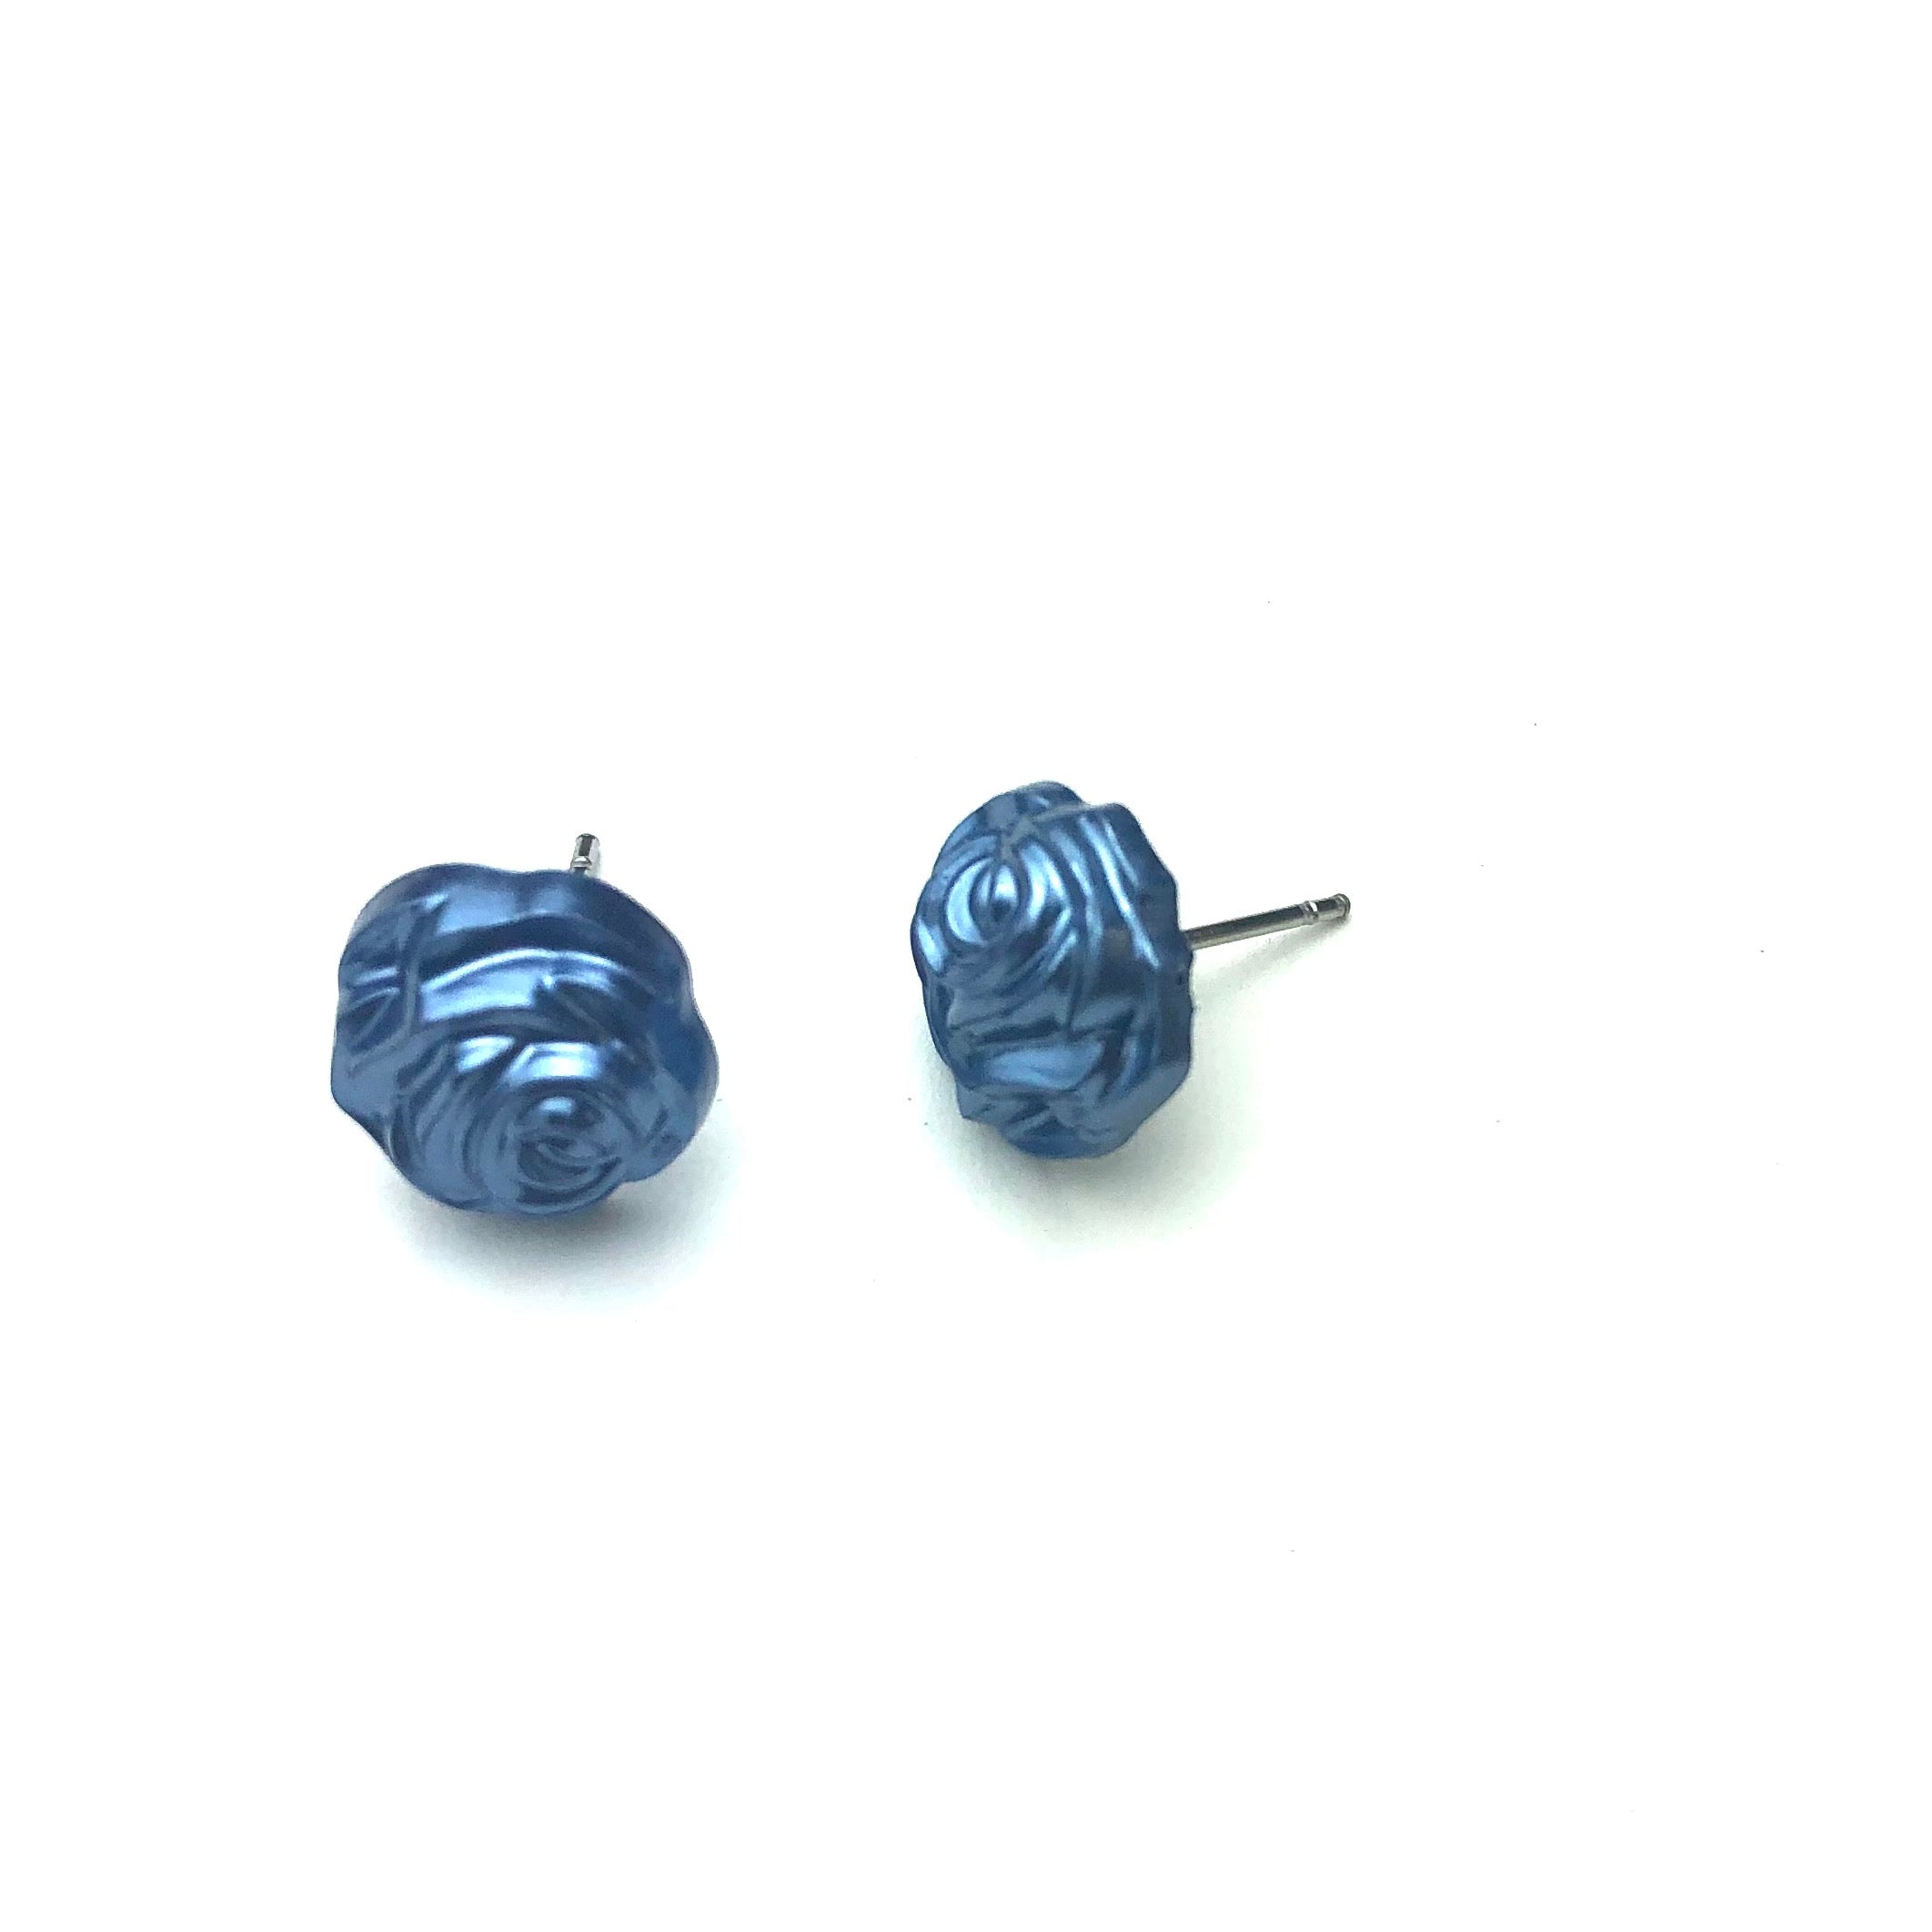 Midnight Blue Pearl Rose Button Stud Earrings